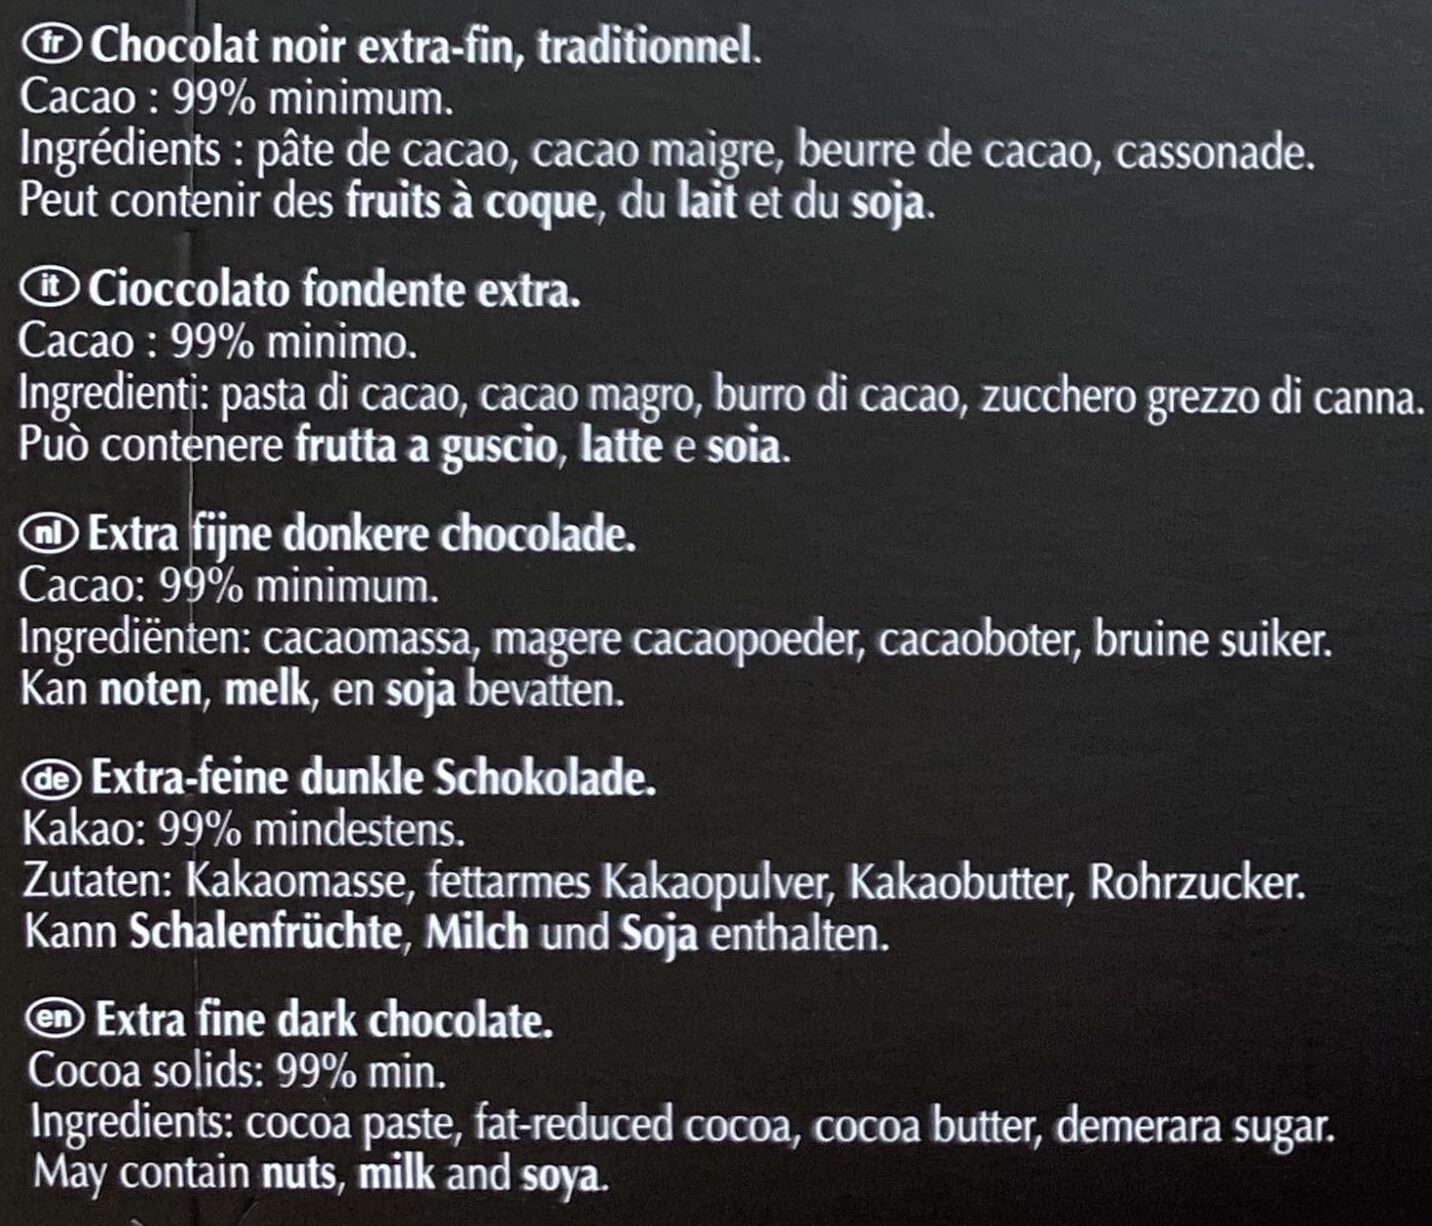 Excellence 99% Cacao Noir Absolu - Ingrédients